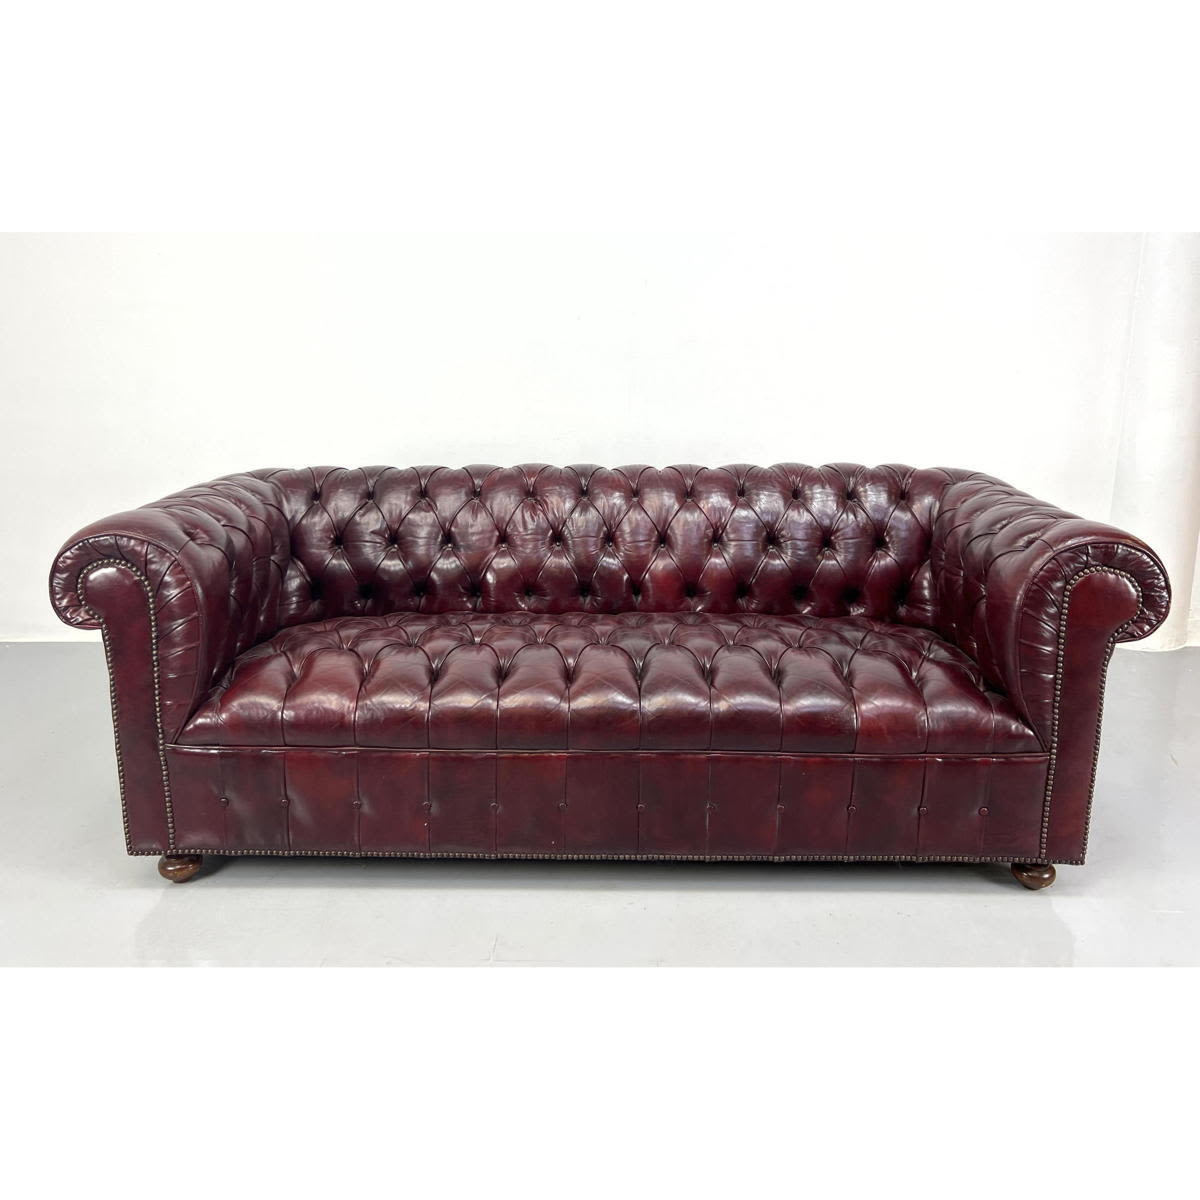 Large Chesterfield Sofa Couch.